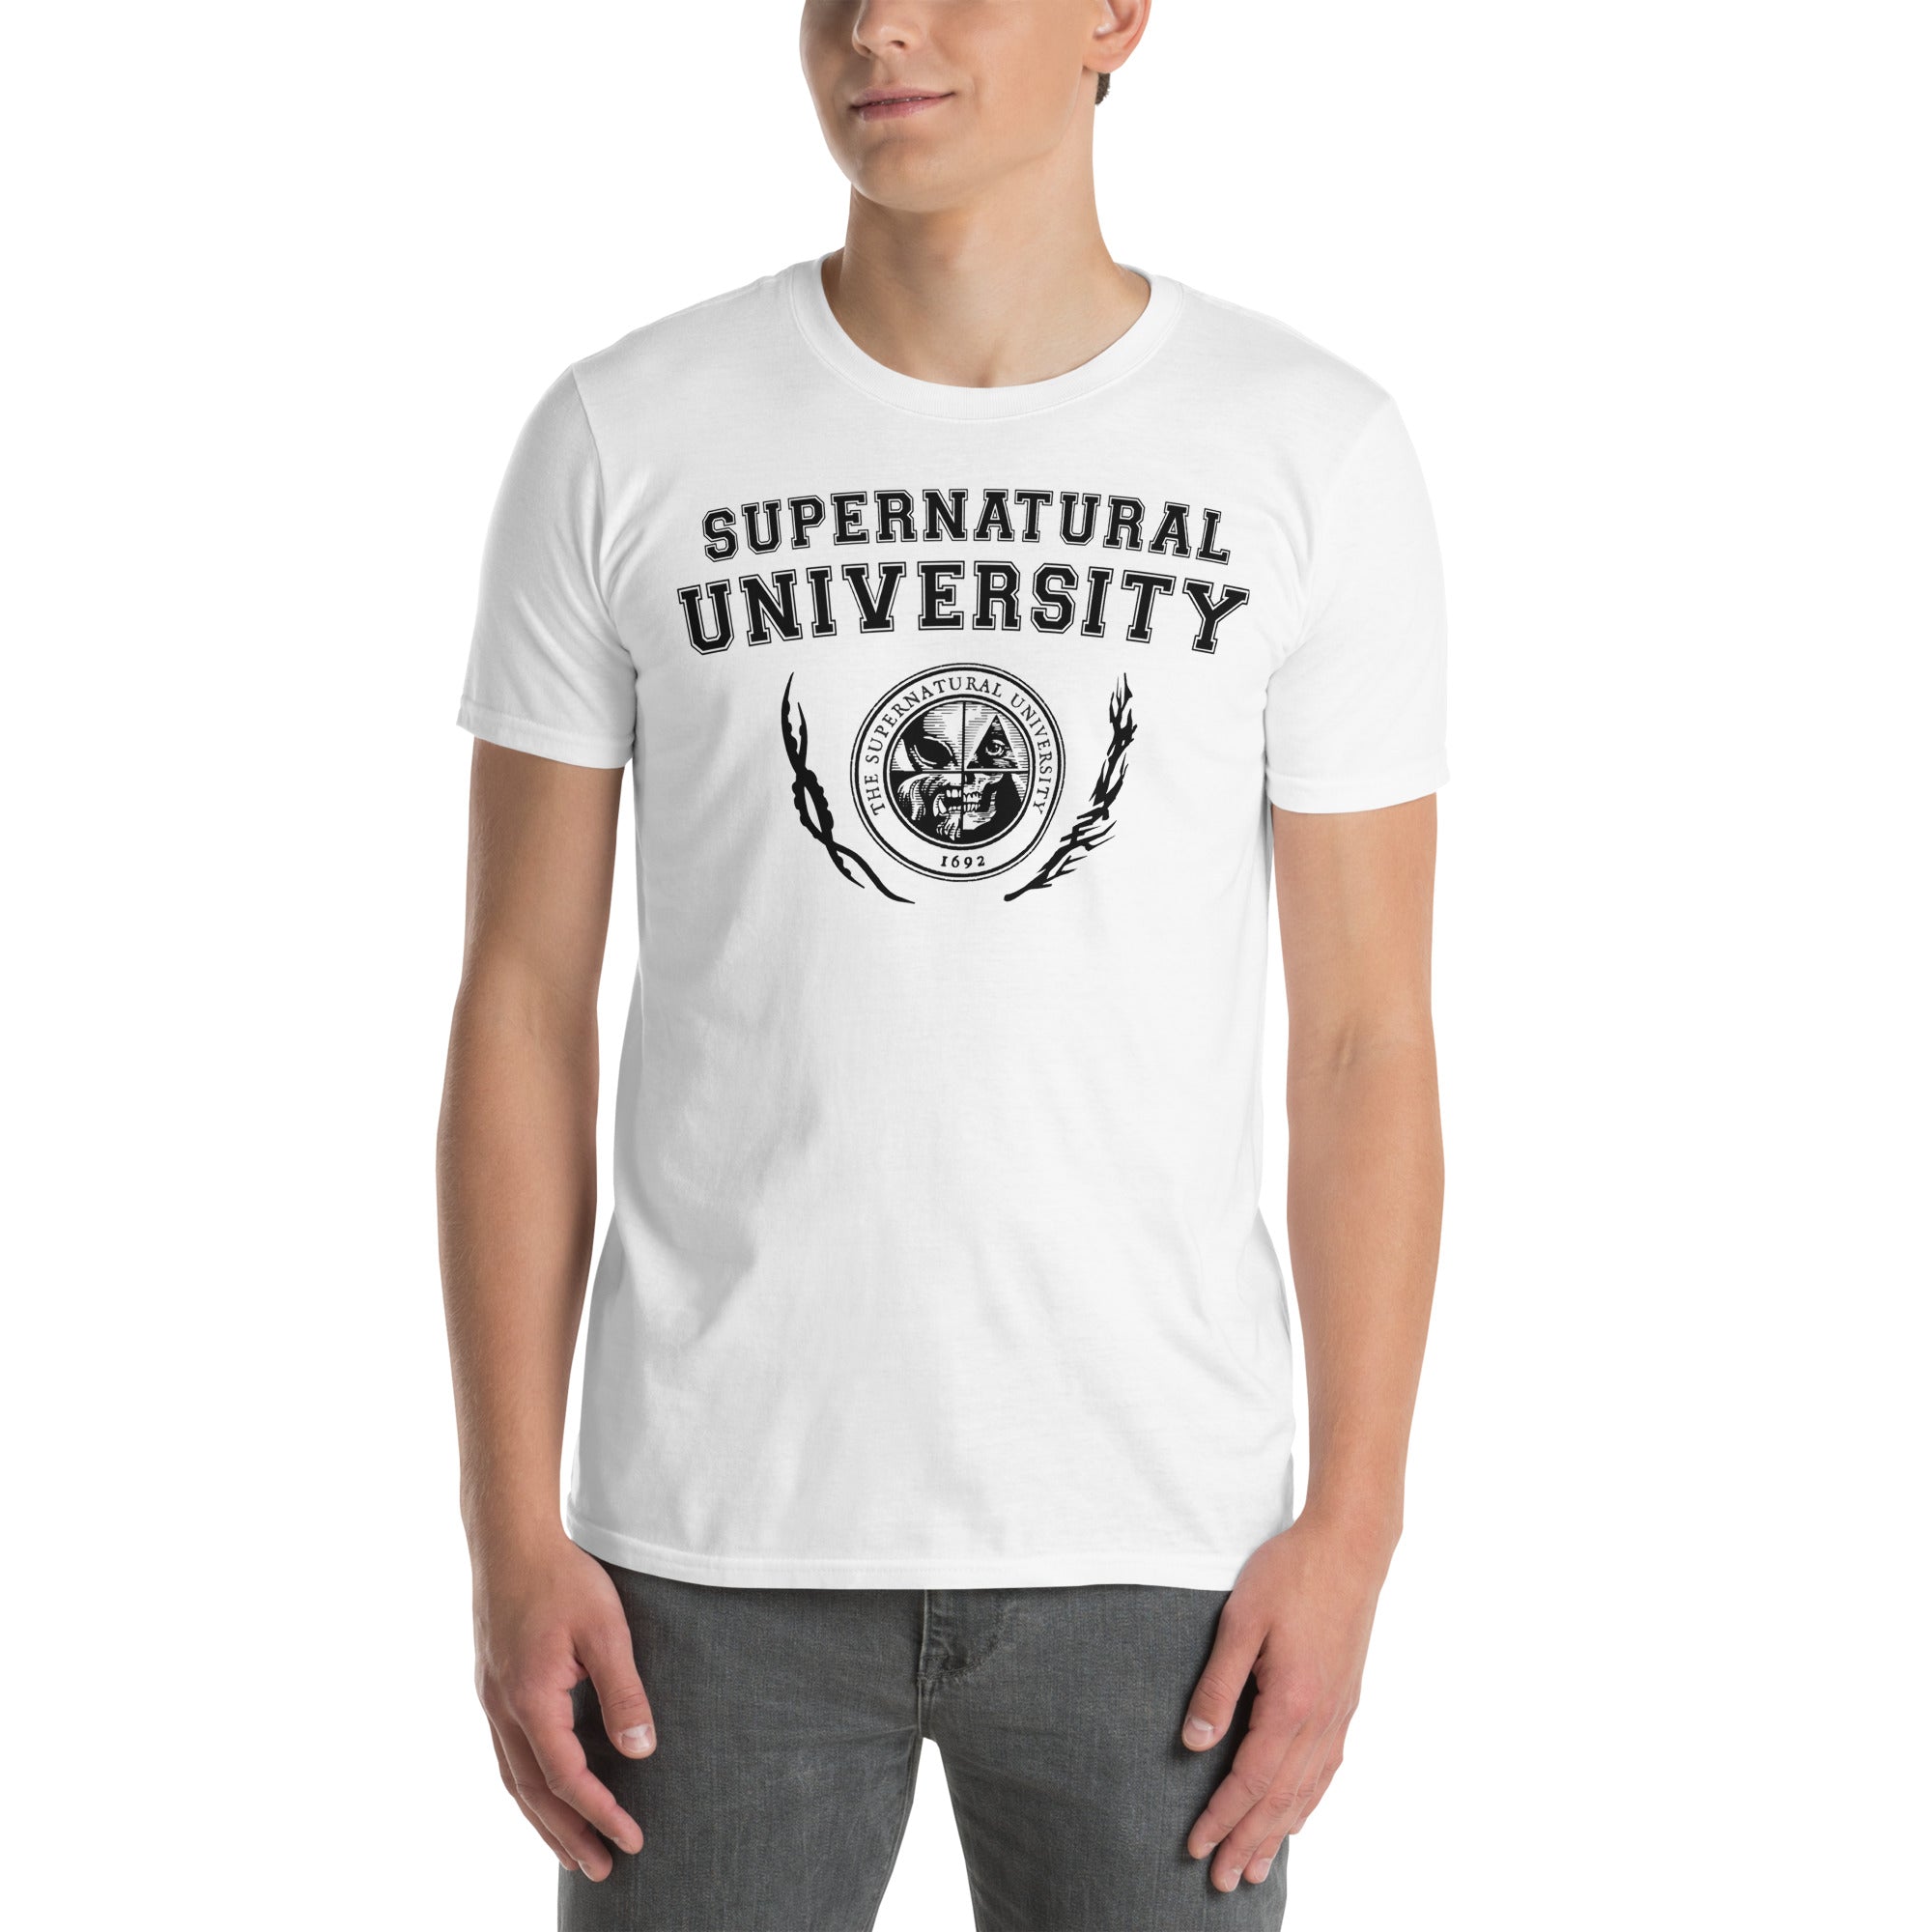 The Supernatural University™ Collegiate Tee - softstyle